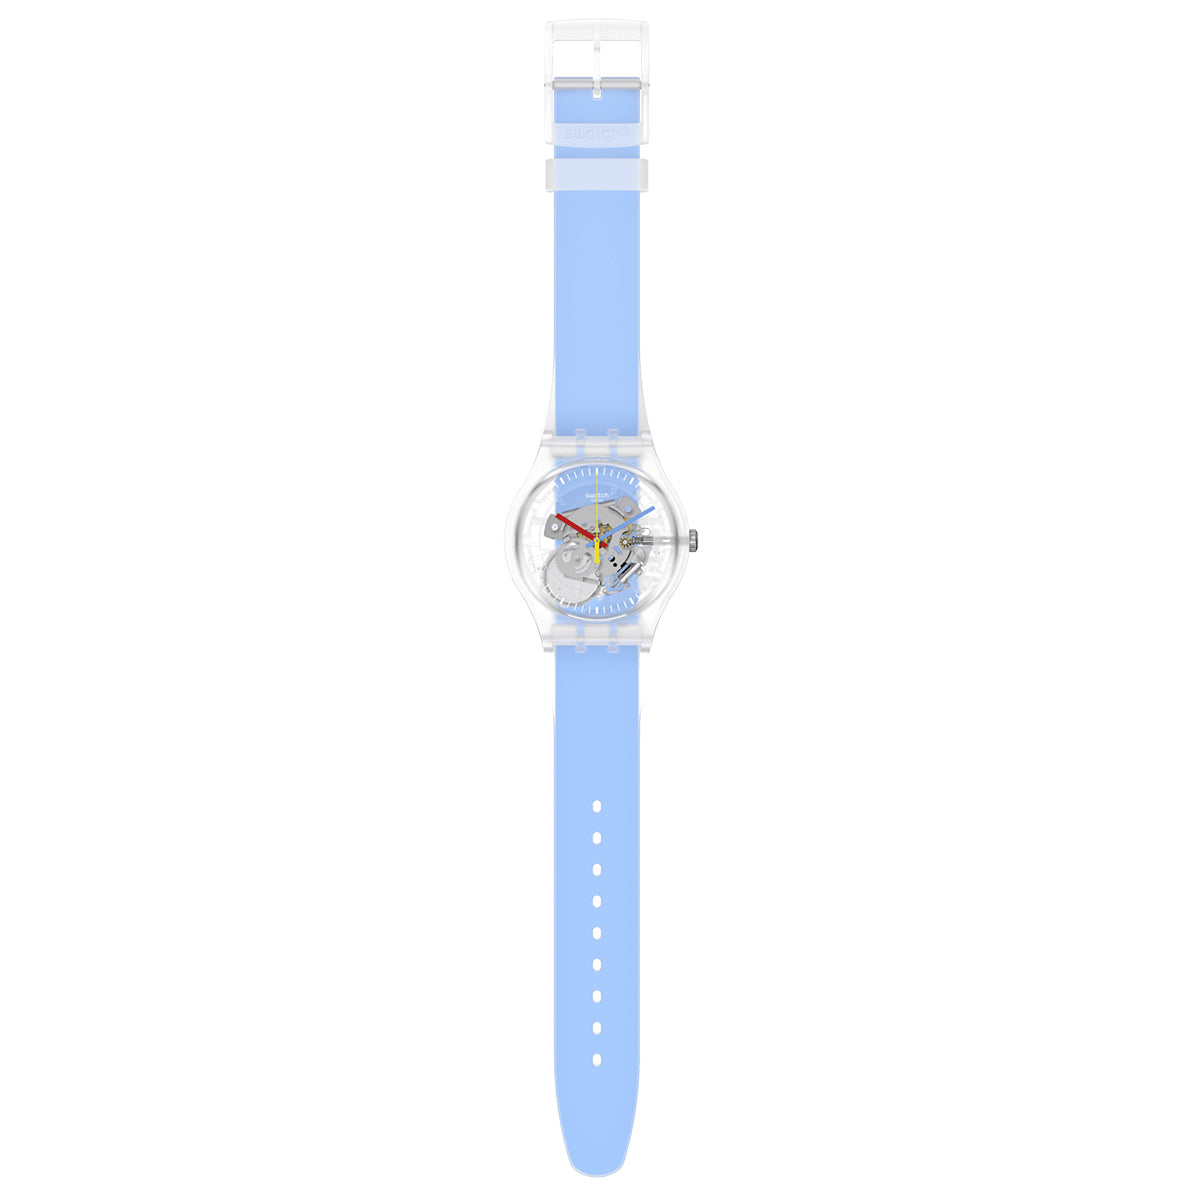 Swatch - Clearly Blue Striped - SUOK156